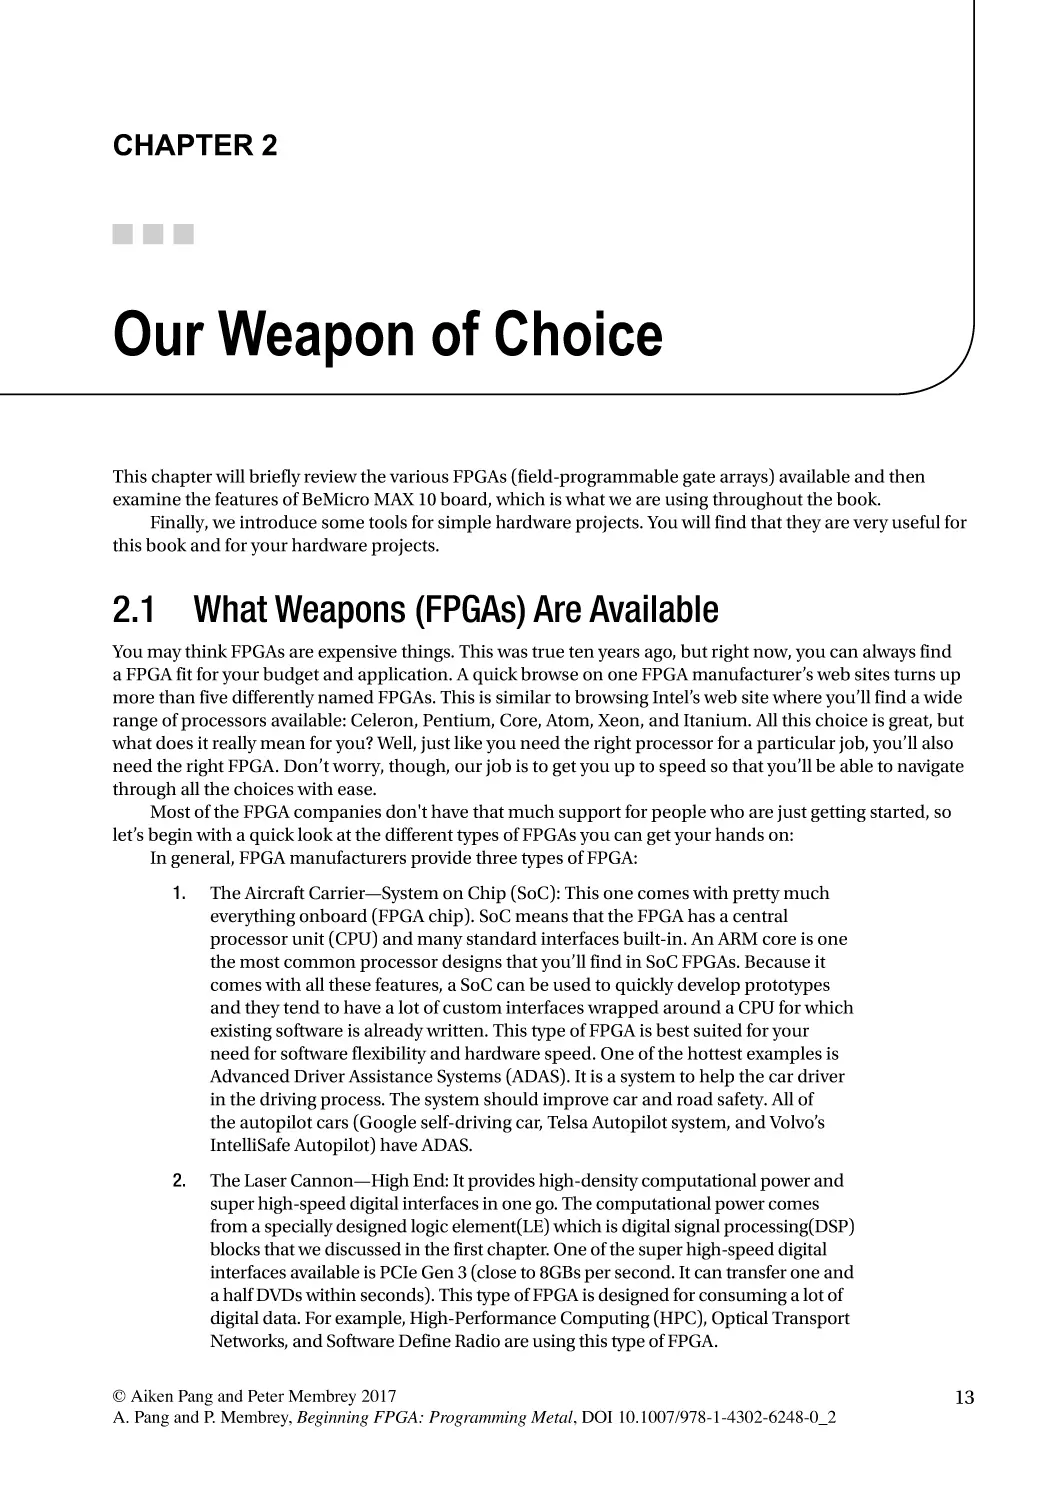 Chapter 2
2.1 What Weapons (FPGAs) Are Available